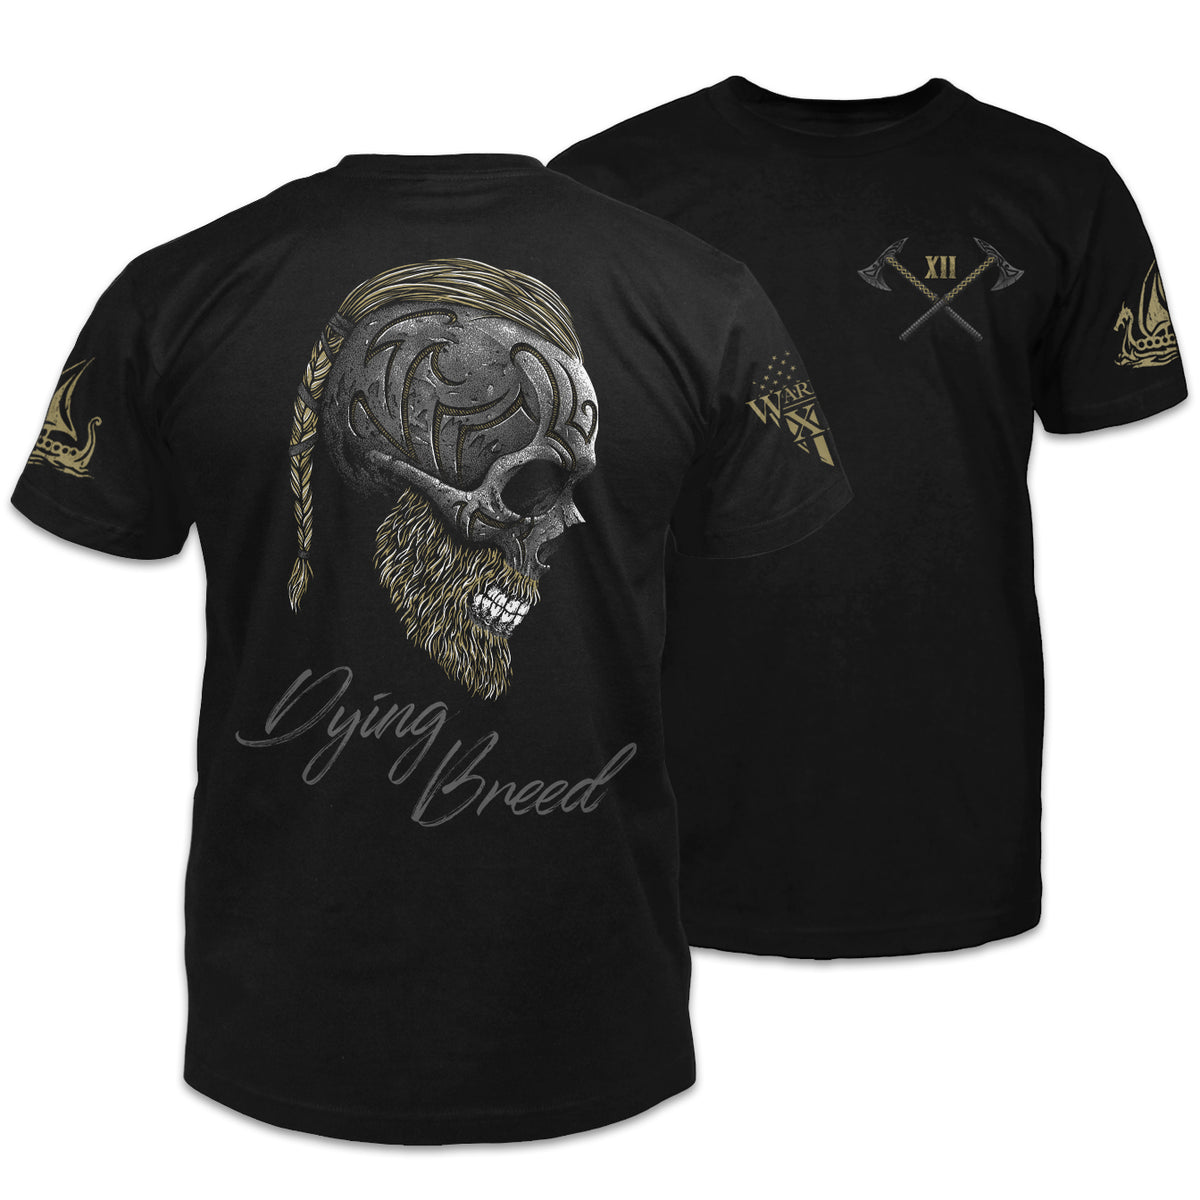 Front and back black t-shirt with the words "Dying Breed" with a side view of a warrior head printed on the shirt.